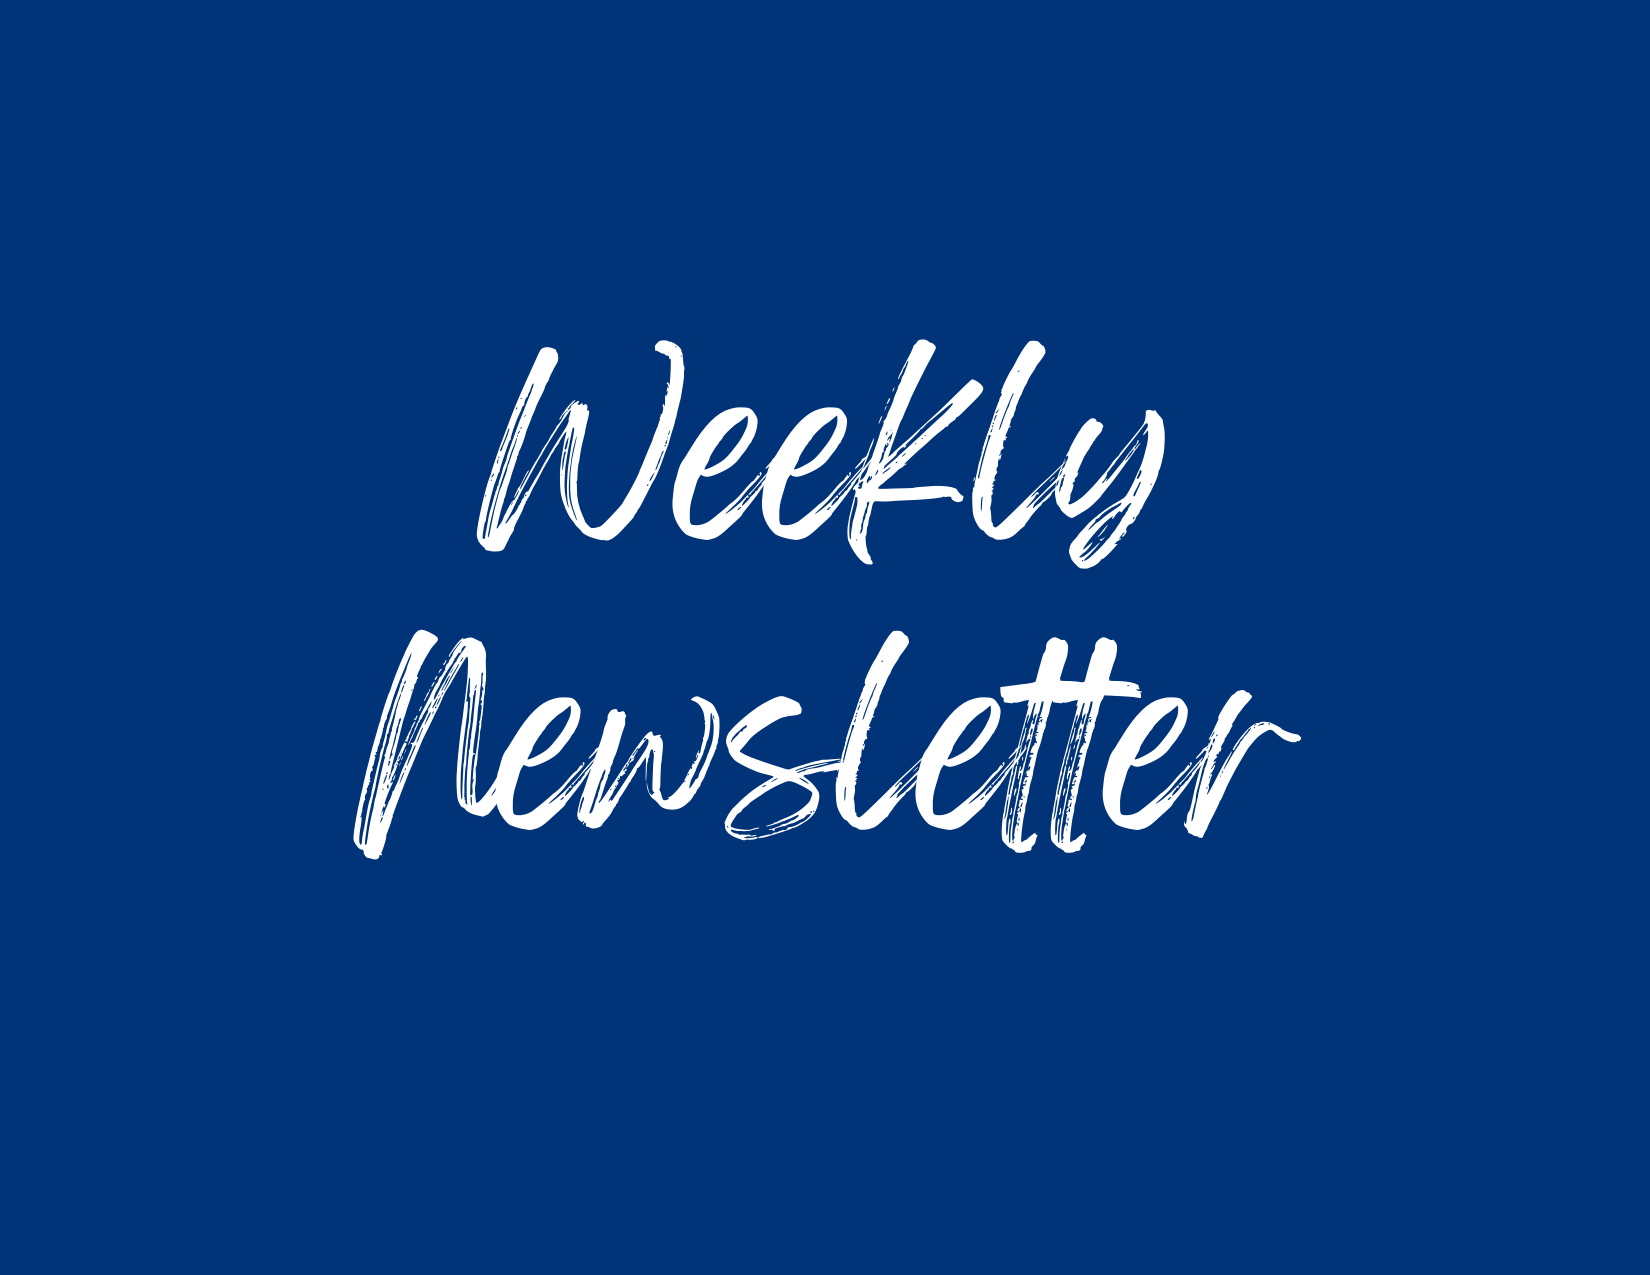 Weekly Newsletter with Resume Writing Help Advice and Tips